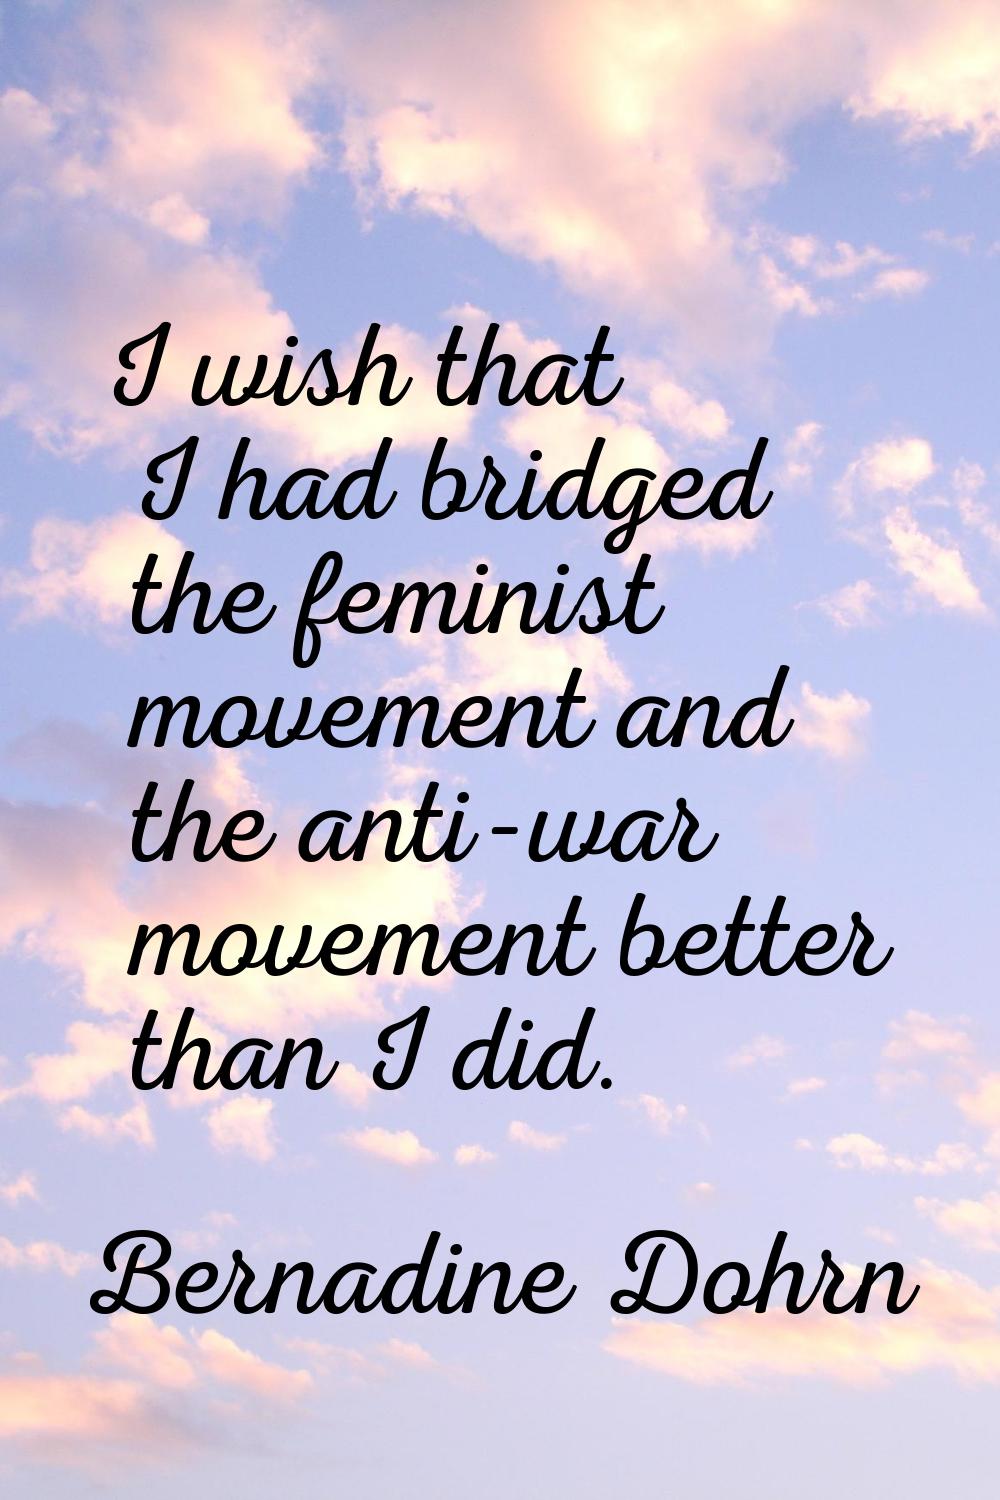 I wish that I had bridged the feminist movement and the anti-war movement better than I did.